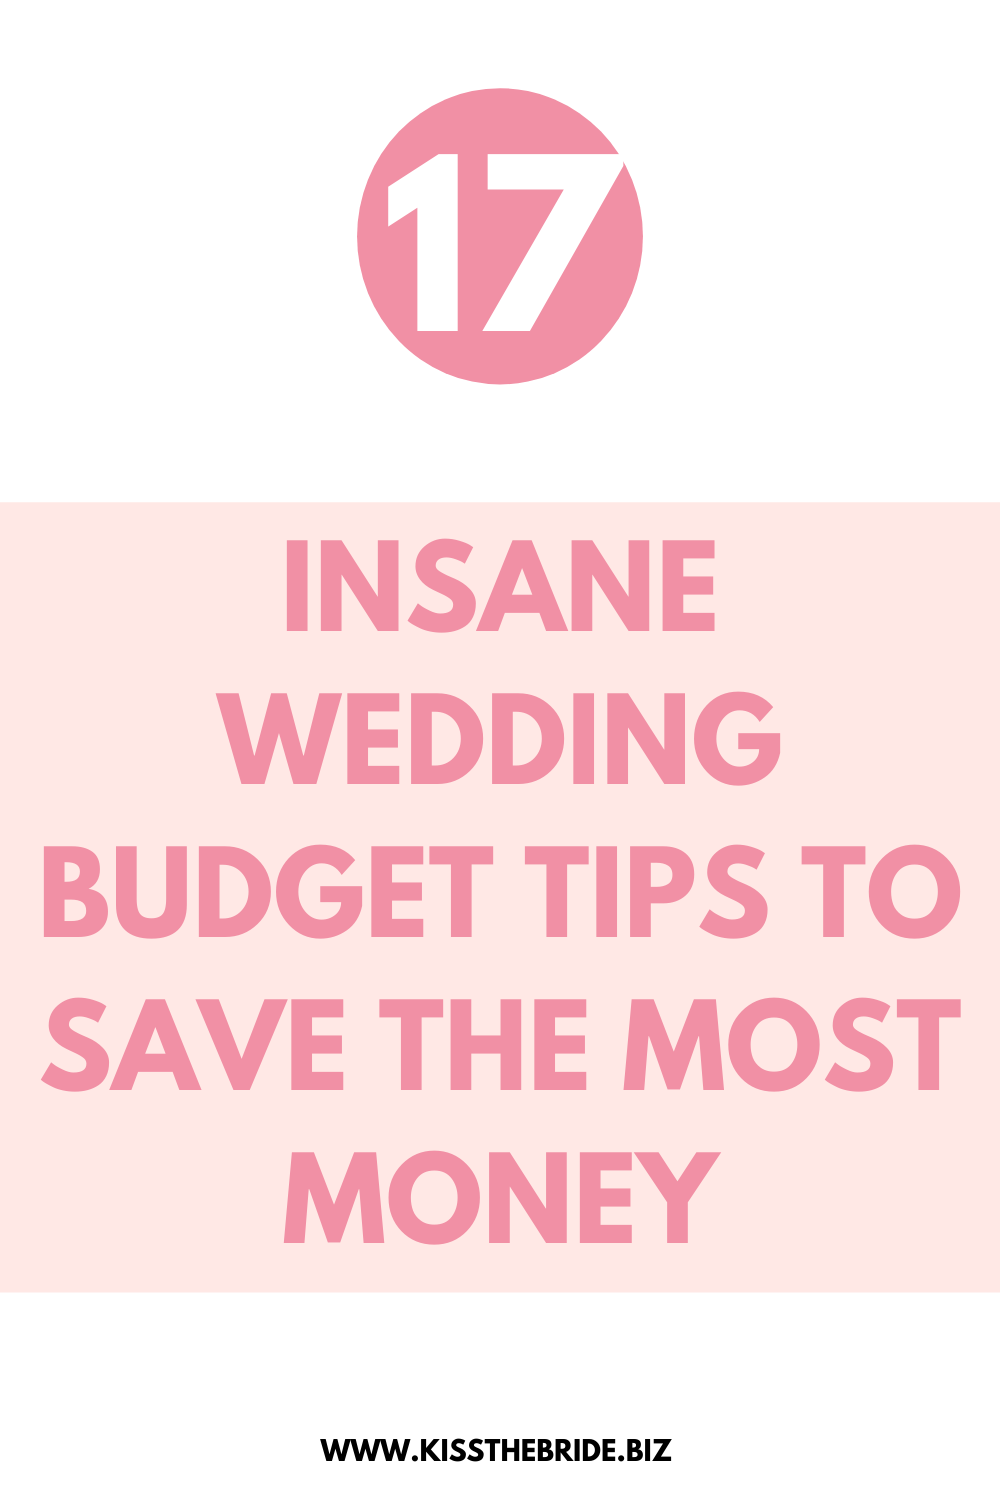 Wedding budget tips and ideas